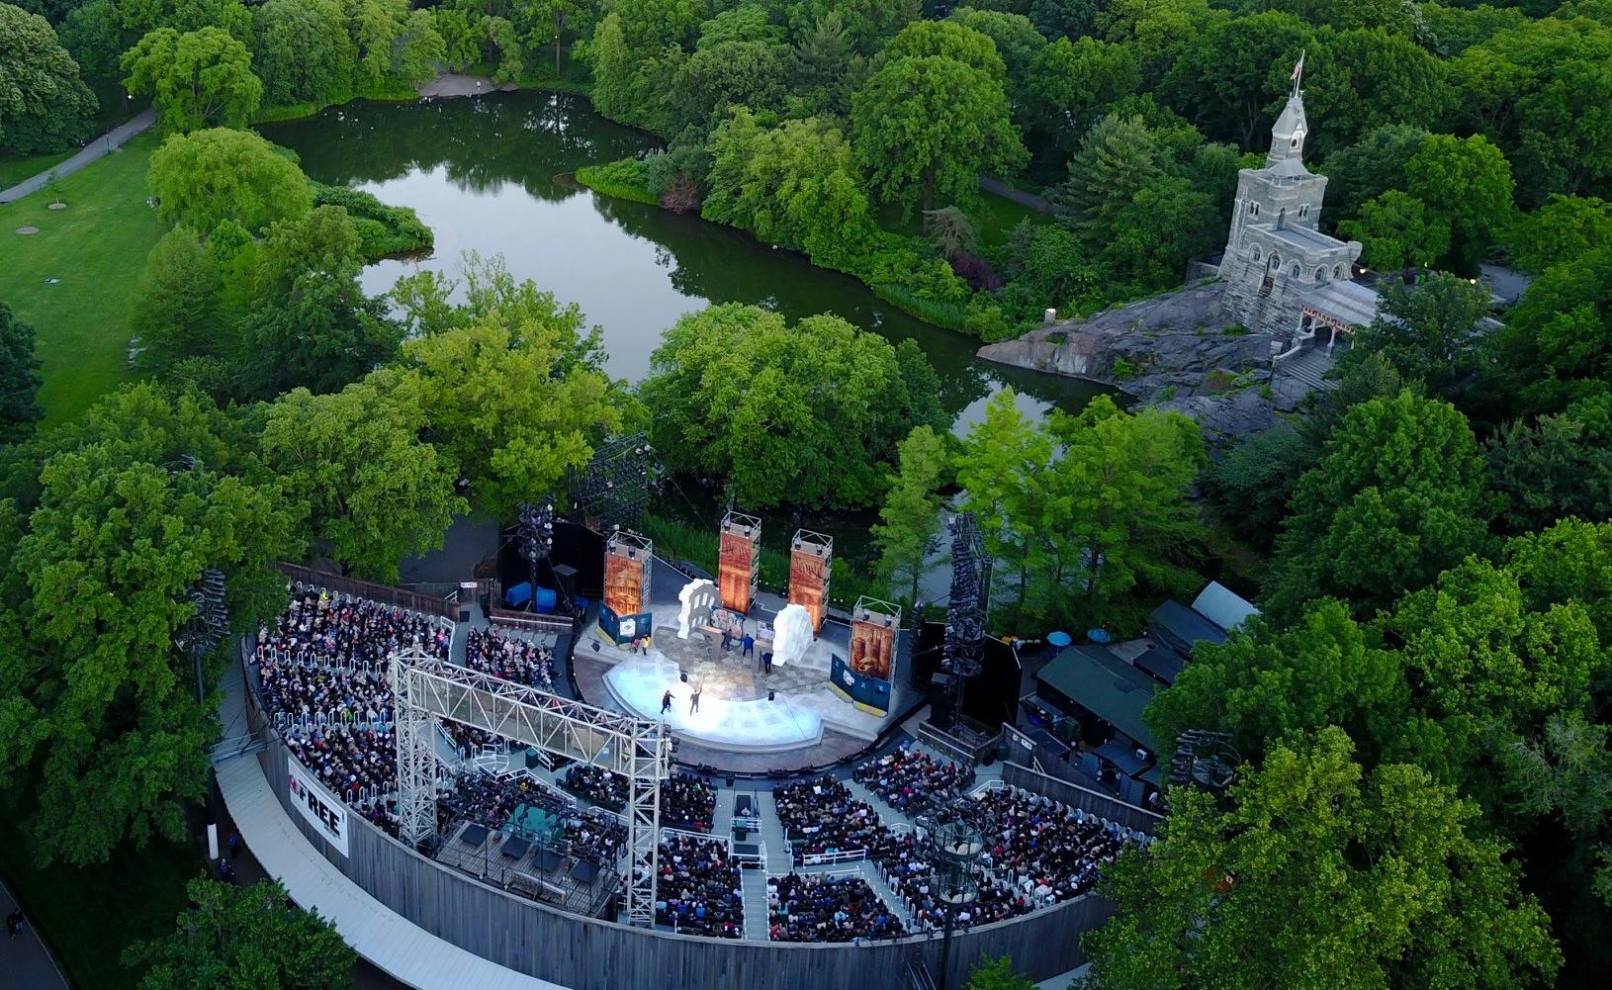 RICHARD III - General Entry - Free Shakespeare in the Park